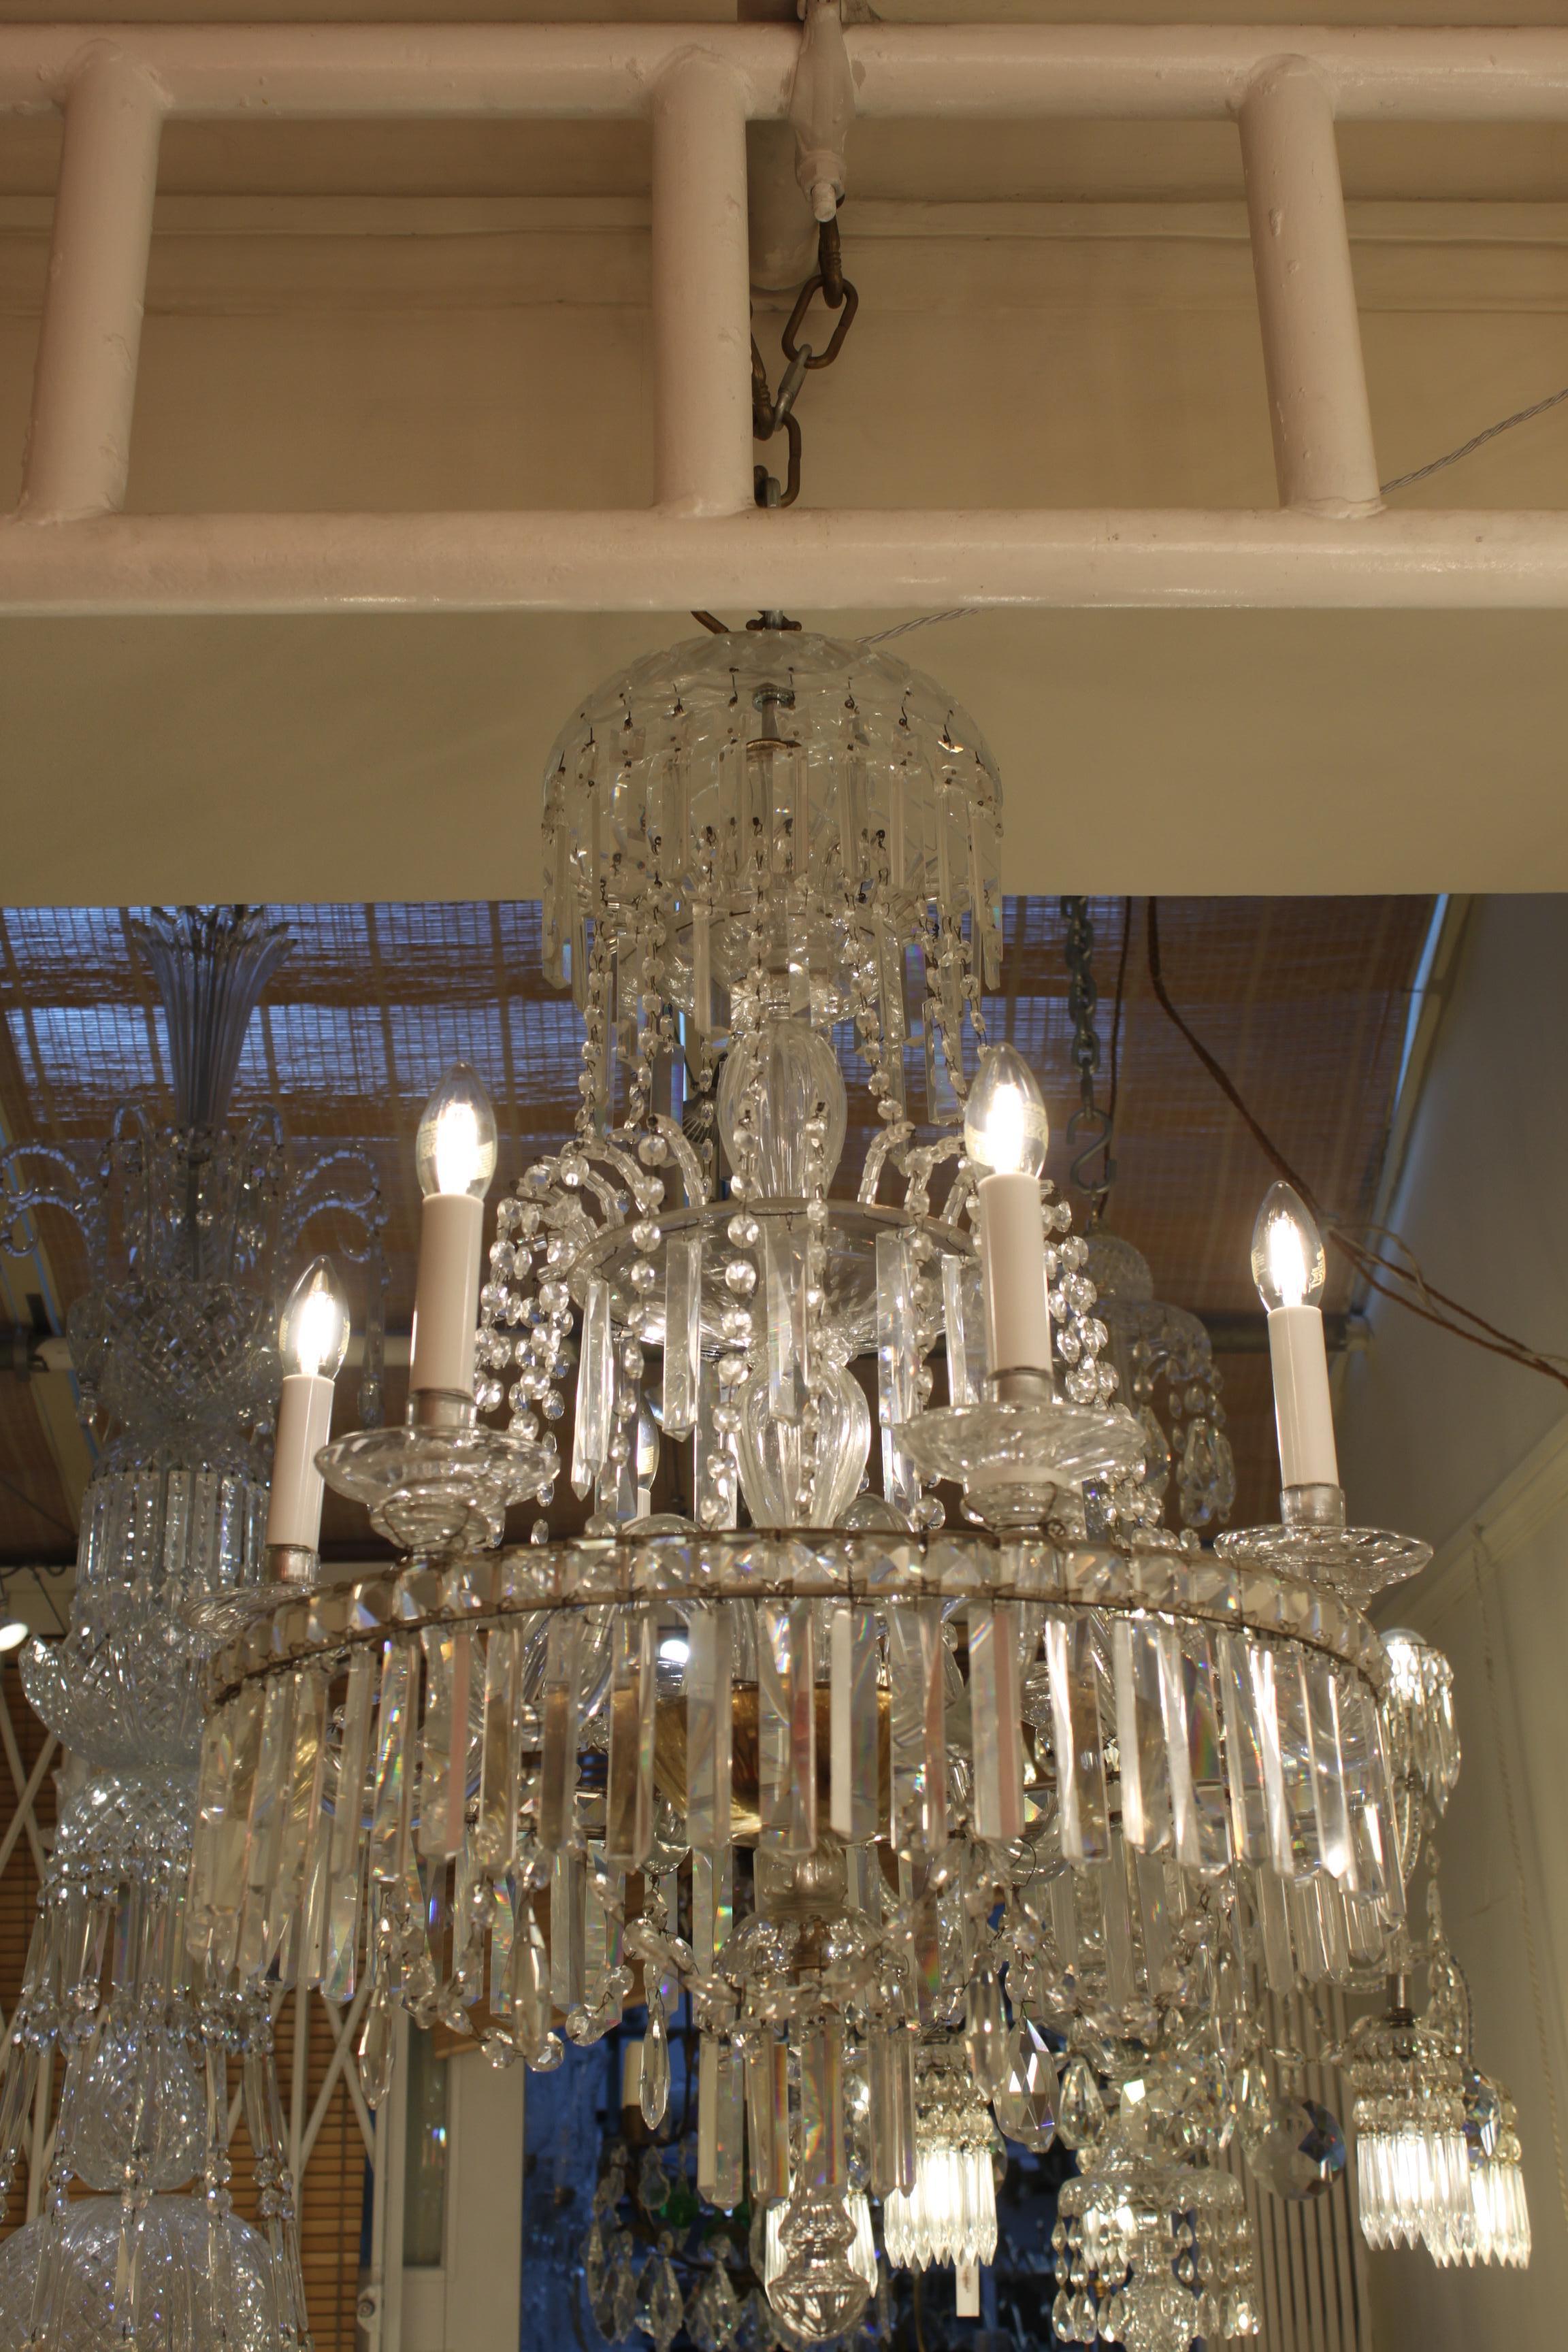 This single round shaped crystal chandelier with six glass arms and lights is in perfect condition . Its very well balanced proportions give a very attractive aspect . All the crystal pieces are in very good shape.

The lower larger ring from